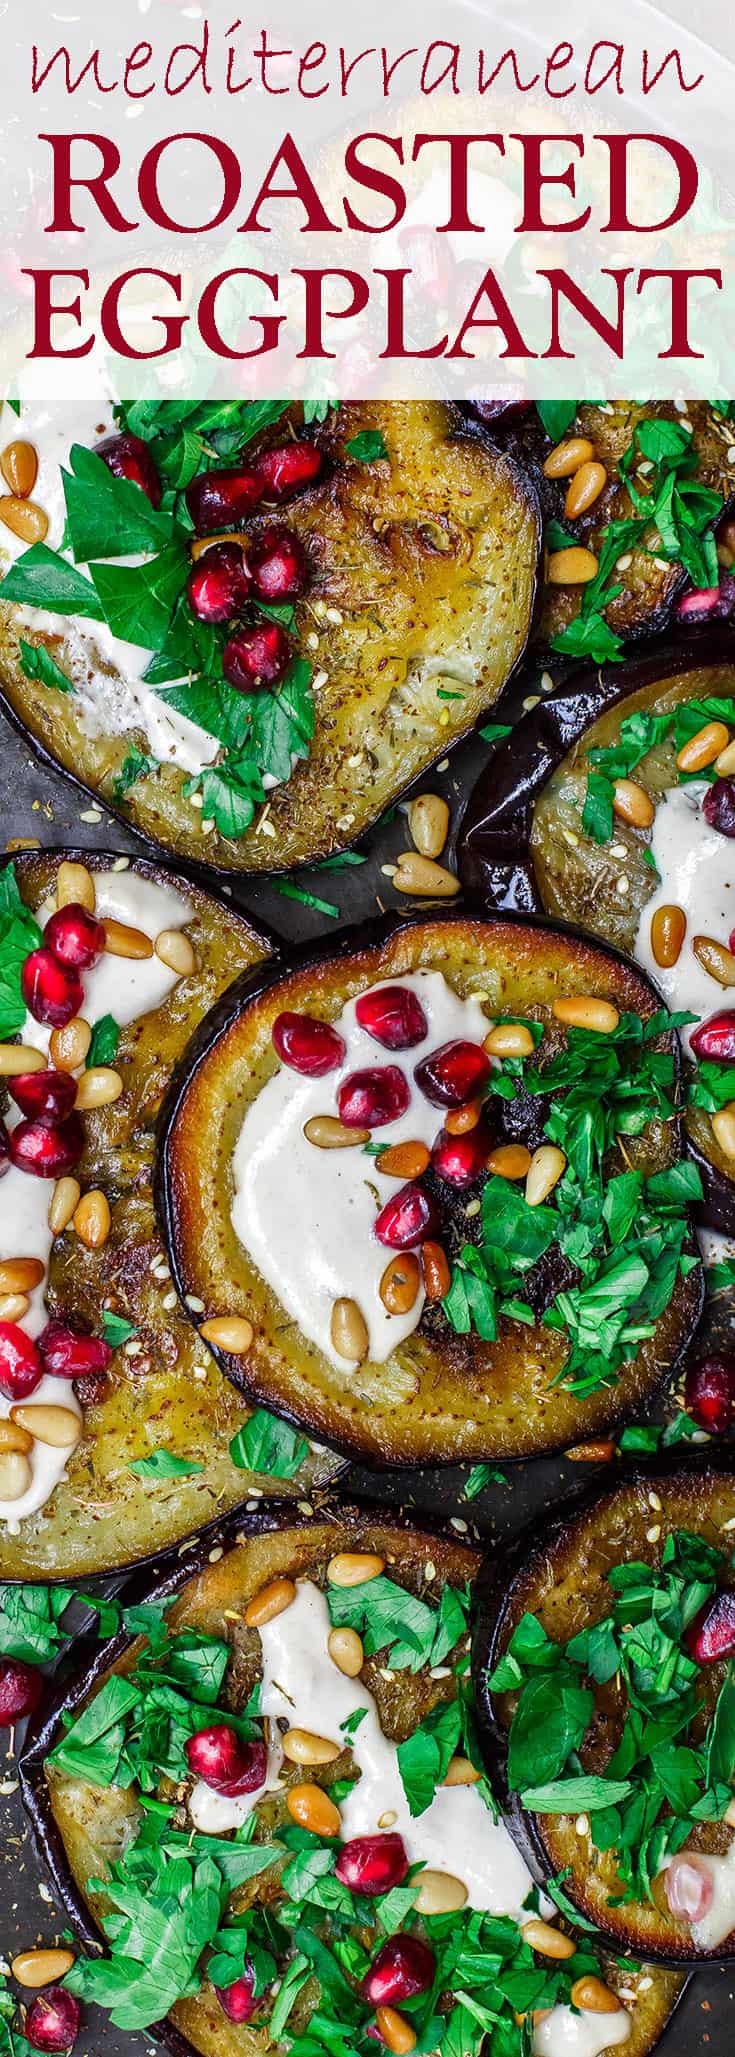 Mediterranean Roasted Eggplant Recipe | The Mediterranean Dish. An easy roasted eggplant recipe, prepared Mediterranean-style with pomegranates, tahini and fresh parsley. Great as an appetizer, salad, or side dish! See it on TheMediterraneanDish.com